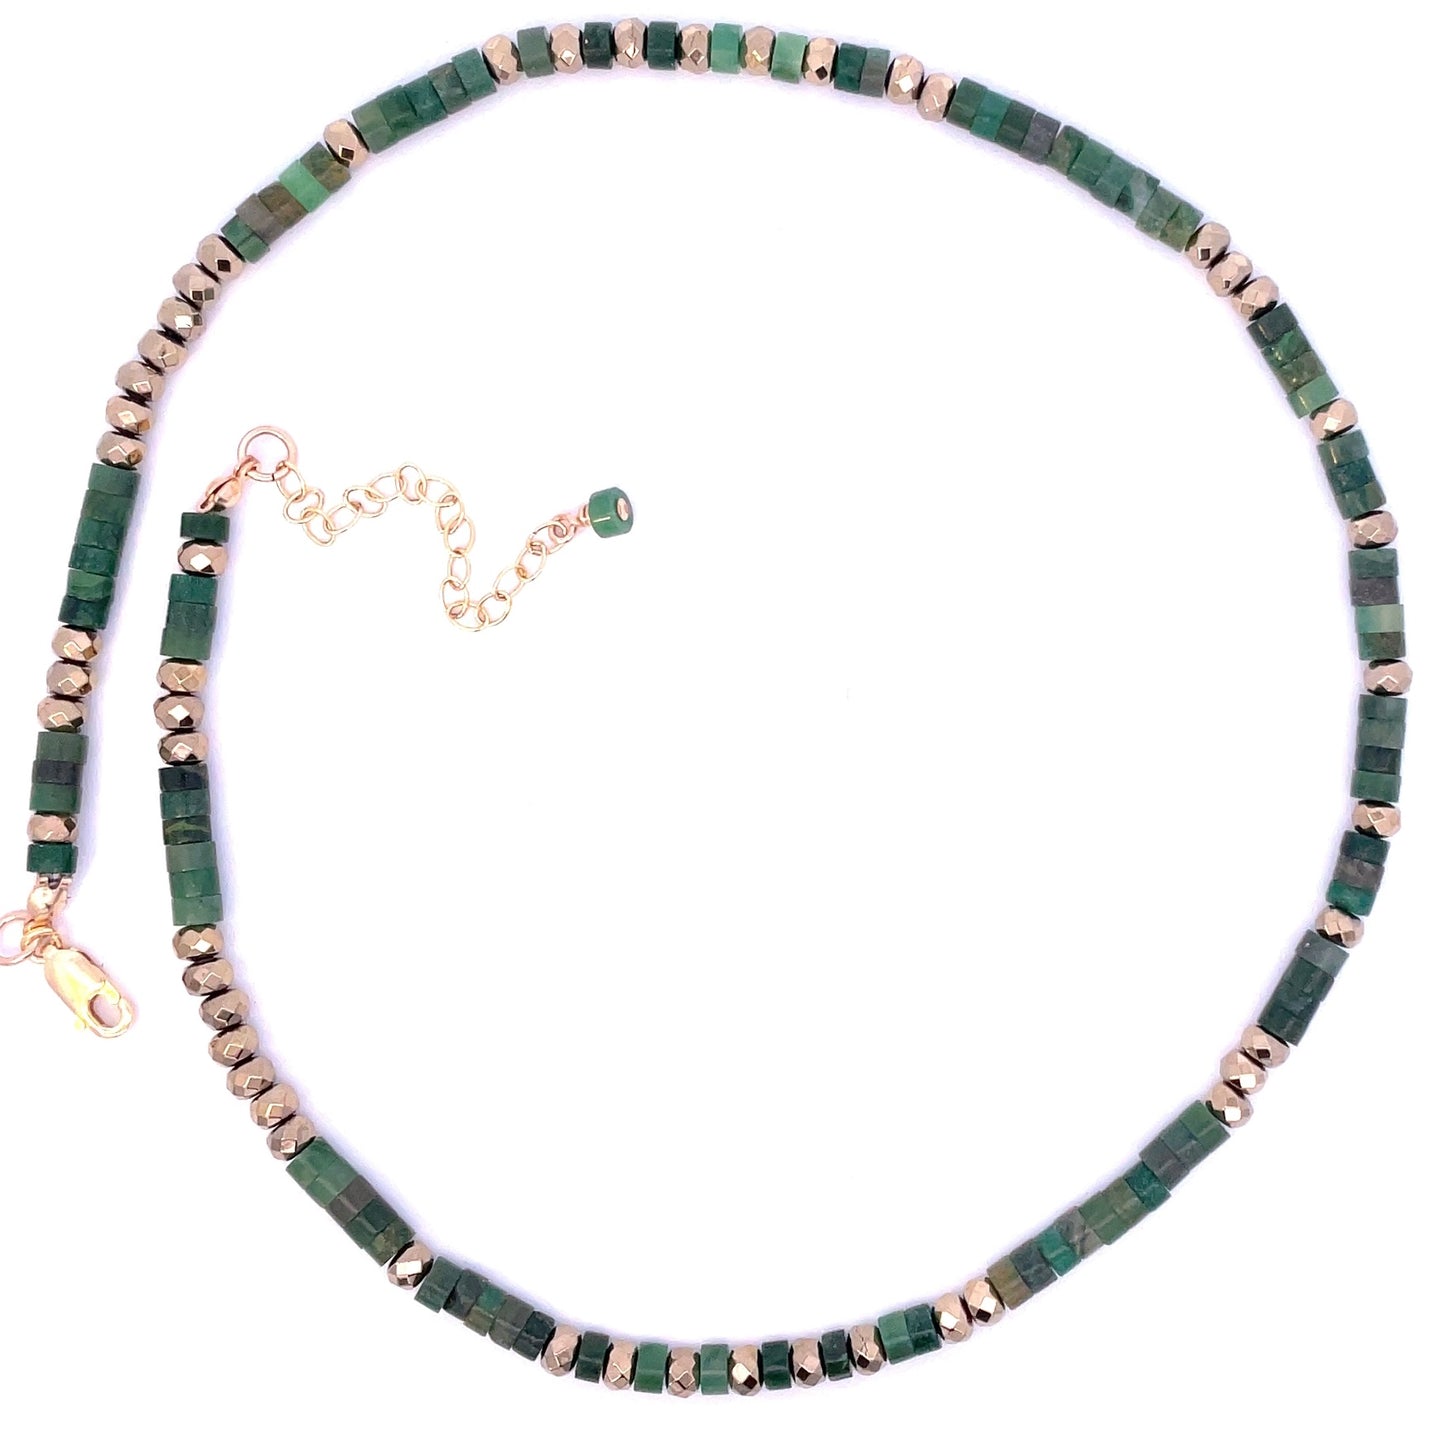 African Green Jade and Pyrite Drum Bead Choker Necklace 14k GF